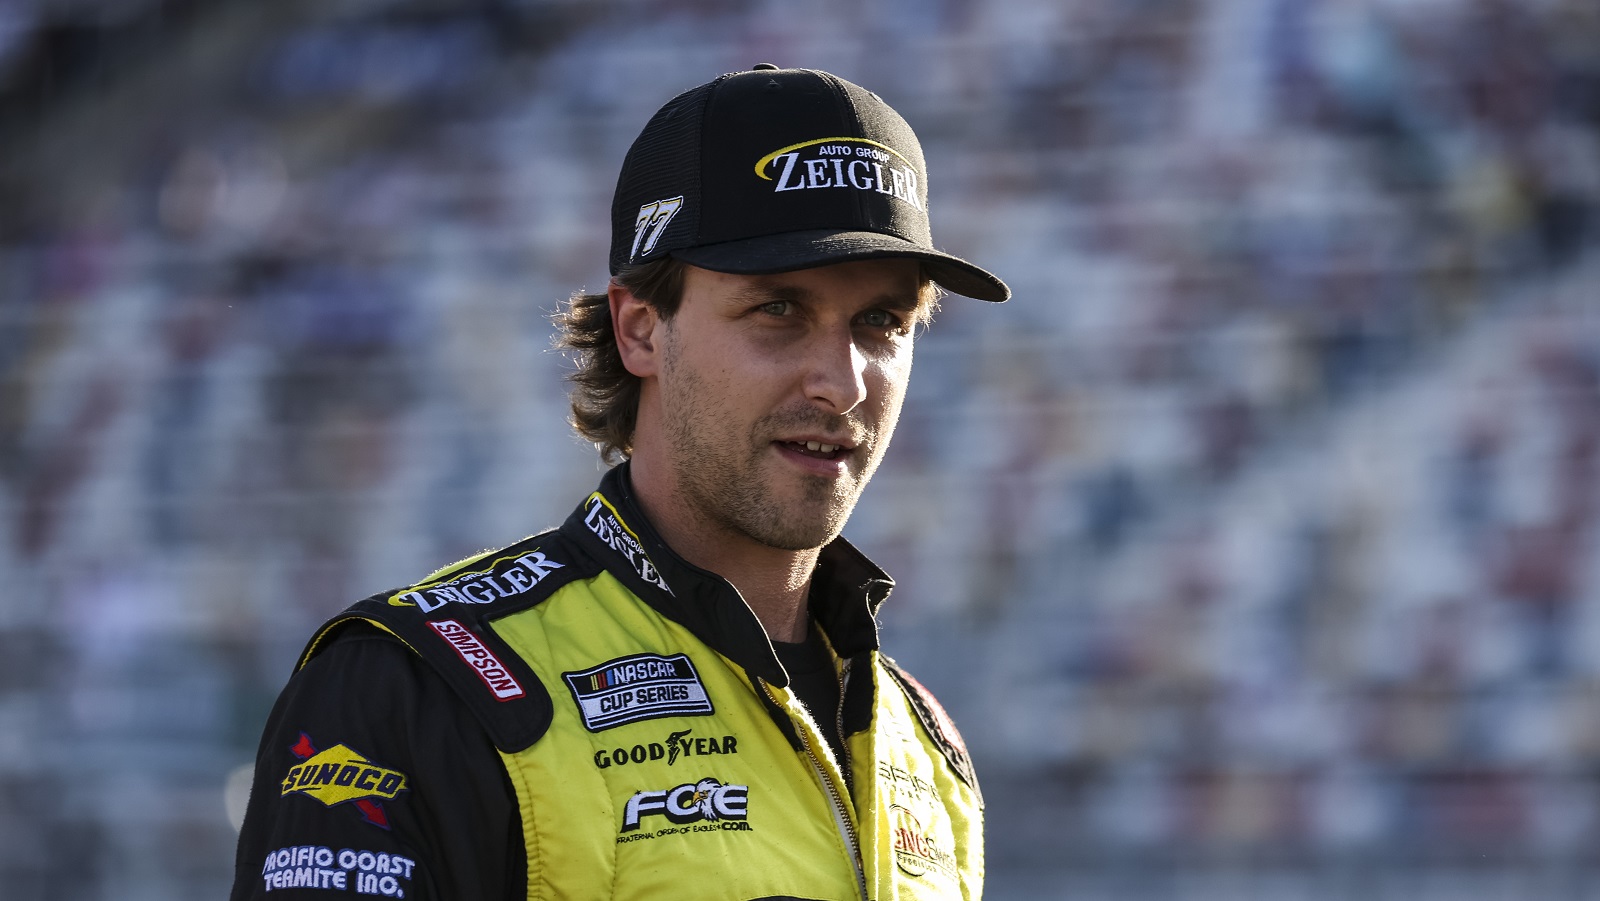 Josh Bilicki looks on during practice for the NASCAR Cup Series Coca-Cola 600 at Charlotte Motor Speedway on May 28, 2022 in Concord, North Carolina. | James Gilbert/Getty Images